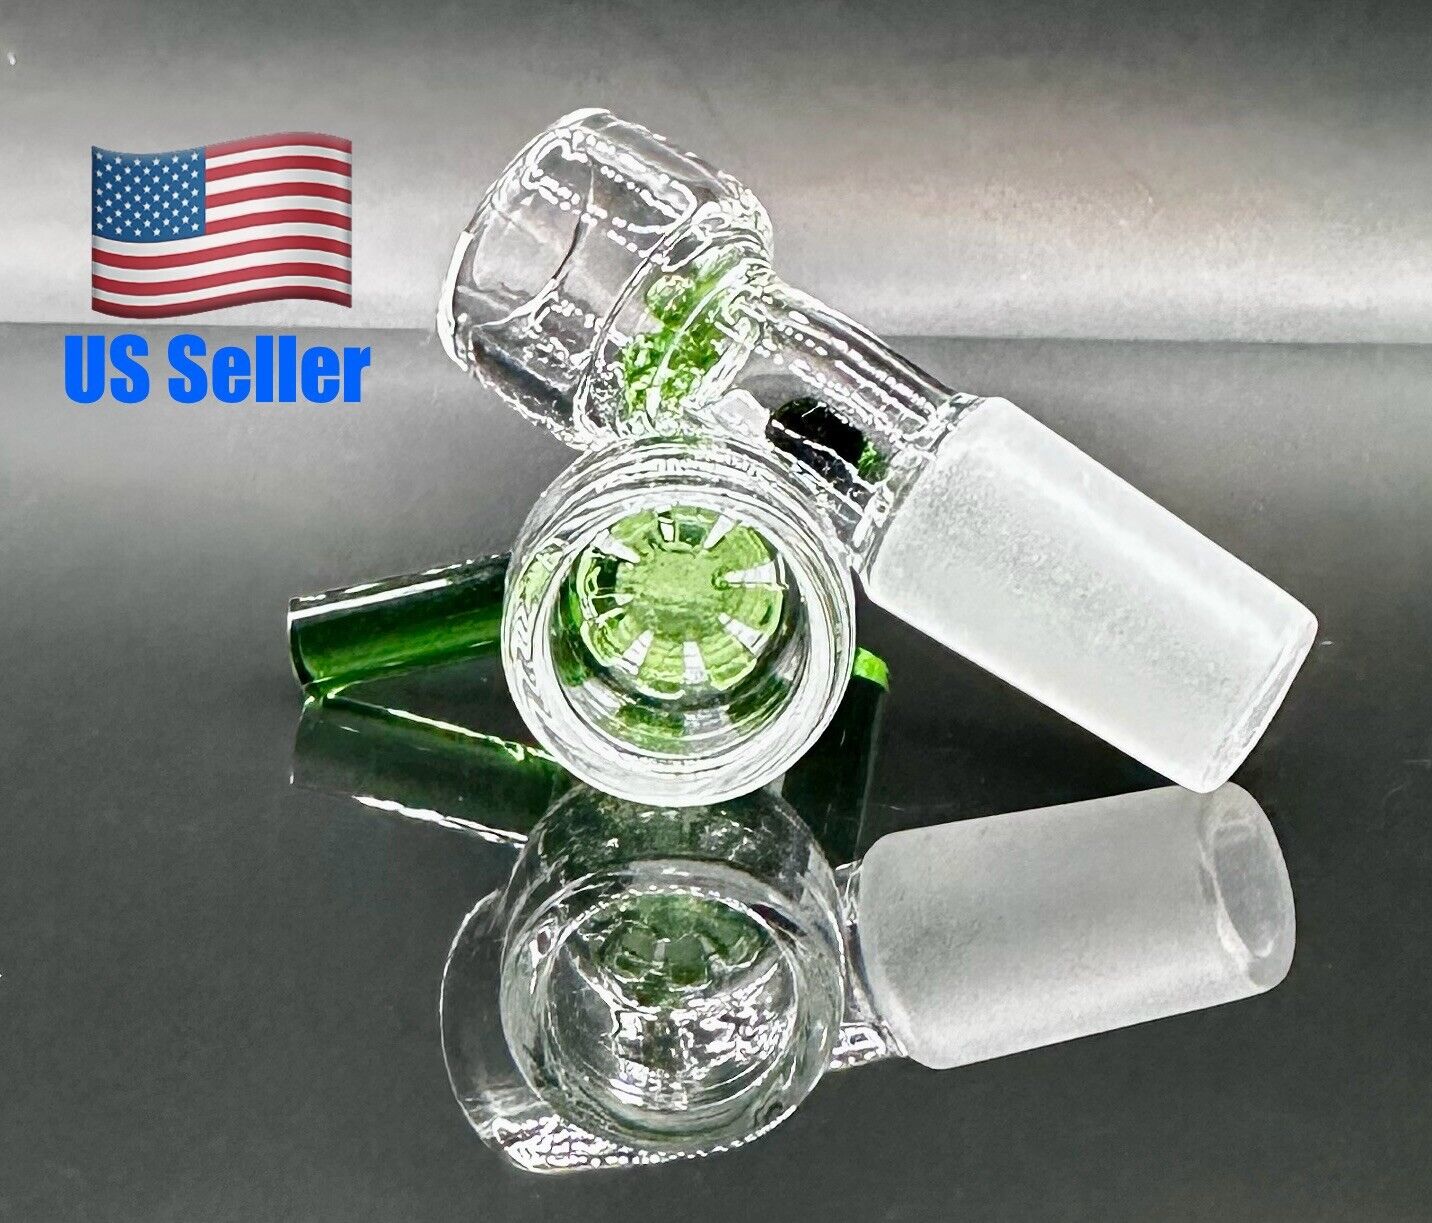 1x 14mm Green Glass SNOWFLAKE SCREEN Slide BOWL Male for Glass Water Pipe Bong